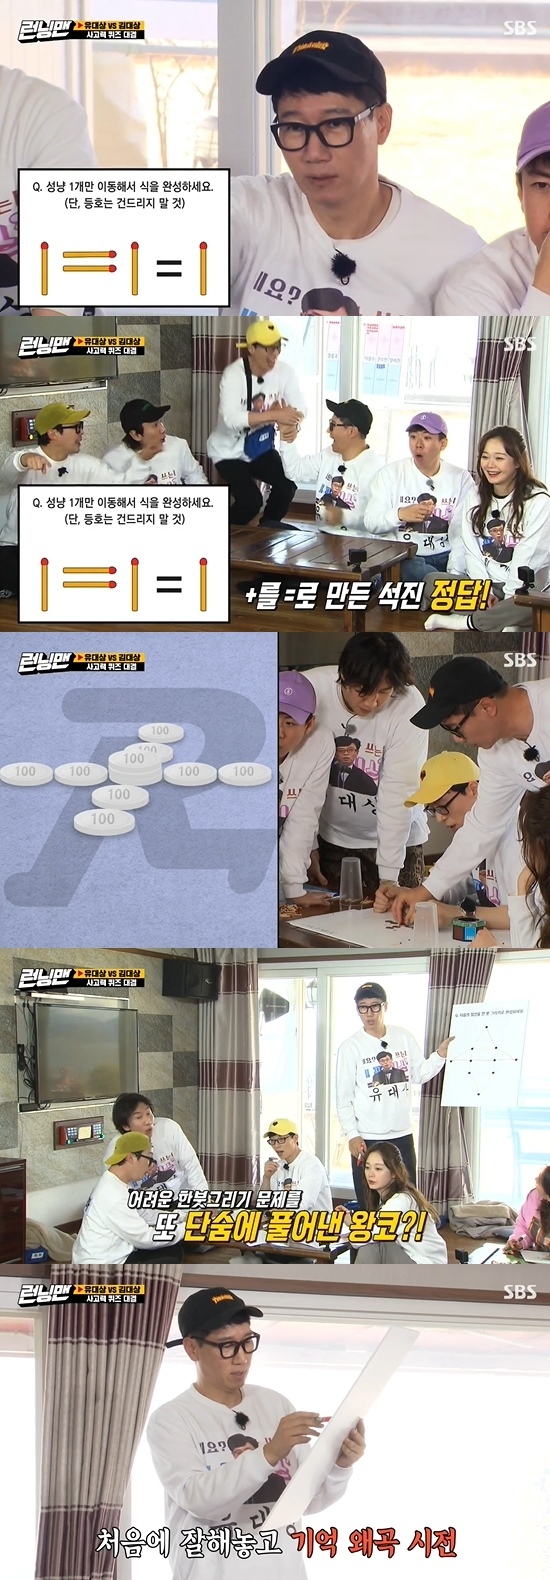 Lee Kwang-soo won the championship while Running Man Judea award and Kim Dae-sang played.On the 21st, SBS Good Sunday - Running Man featured a special race.A simple memorial hall was built for the Grand Prize winners Yoo Jae-Suk and Kim Jong-kook.Each mission was a class of the object race, which required members to choose one of the Judea and Kims teams; ahead of the second mission, the members once again Choices the team leader.Ji Suk-jin, Yang Se-chan also chose Kim Jong-kook, while Song Ji-hyo also came in kneeling.Lee Kwang-soo chose Kim Jong-kook, saying, Why did you get angry when you did not do the same thing with me?The Yoo Jae-Suk team was Haha, Jeon So-min.The second mission is Follow My Words, touching the body part of the host, and when the host shouts Over, catch the rip first and pour it on the other sides face.With Kim Jong-kook becoming the host, Song Ji-hyo and Jeon So-min played the showdown.Kim Jong-kook even cared about his posture as he shouted toe, knee.When Kim Jong-kook did not think to shout Over, Song Ji-hyo eventually laughed with anger and Kim Jong-kook.Dont you do it or not? How long will you be on your toes, knees, Song Ji-hyo revealed.The next host, Ji Suk-jin. Yoo Jae-Suk, started Chuck Acting, and laughed, saying, Im so bored... I cant stand boring.The Ji Suk-jin progression has resumed, but Lee Kwang-soo has fallen down because of boredom.Lee Kwang-soo laughed when Yoo Jae-Suk shouted Whos the sparrow and washed her face with water.Ji Suk-jin finally shouted Over, but Yoo Jae-Suk only got up after Kim Jong-kooks waters and said, Is it over? Im asleep?, adding a laugh: Isnt it hypnosis, this is a foul, the Judea team said.Next, you have to Choice the team leader who wants to eat together.The members wanted to Choices Yoo Jae-Suk, saying, I want to eat rice comfortably, but I was afraid of the back end of Kim Jong-kook, saying, I have to think well.Yang Se-chan, Jeon So-min and Song Ji-hyo ate ramen with Yoo Jae-Suk, while Ji Suk-jin, Lee Kwang-soo and Haha ate a protein diet with Kim Jong-kook.Third team Choices time; Song Ji-hyo only chose Kim Jong-kook, while the rest of the members came into the Yoo Jae-Suk room.Judeas team members feared that the end is now a big deal. Kim Jong-kook came in with a cool atmosphere, saying Im okay.The last mission was a wonderful quiz, with chances for each issue.If the answer is not answered for three minutes, one team can go outside and search for hints. Yang Se-chan said, Are you talking about me running all day? Kim Jong-kook laughed at Song Ji-hyo by wearing a coat.The first problem was to move only one match to complete the equation; Ji Suk-jin hit the problem lightly, and hit the second problem.Ji Suk-jin was to get the third problem right, but mistakenly lost the right answer to Kim Jong-kook; Lee Kwang-soo said, What if you are gifted?I can not get the right answer. Ji Suk-jin succeeded to the last problem and led the Judea team to victory.The final result was first place: Lee Kwang-soo, who won the Wangumji Trophy.The last place was Kim Jong-kook and Song Ji-hyo, who pointed to Jeon So-min as a penalty member.Photo = SBS Broadcasting Screen